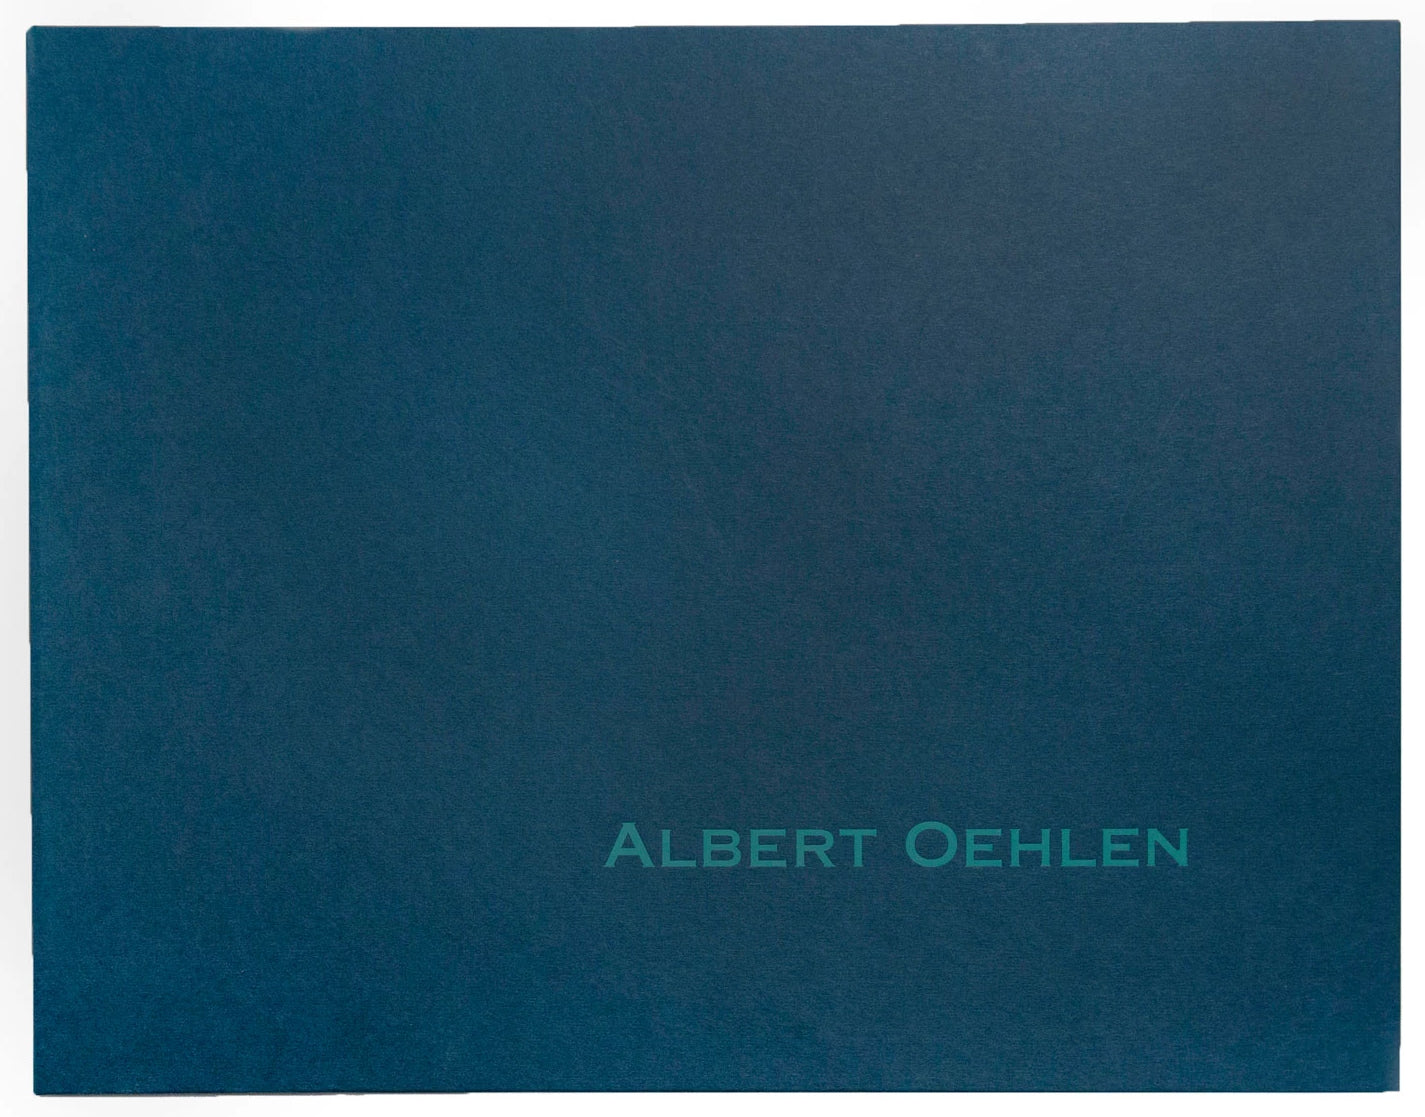 Cover of Albert Oehlen's exhibition catalog for 